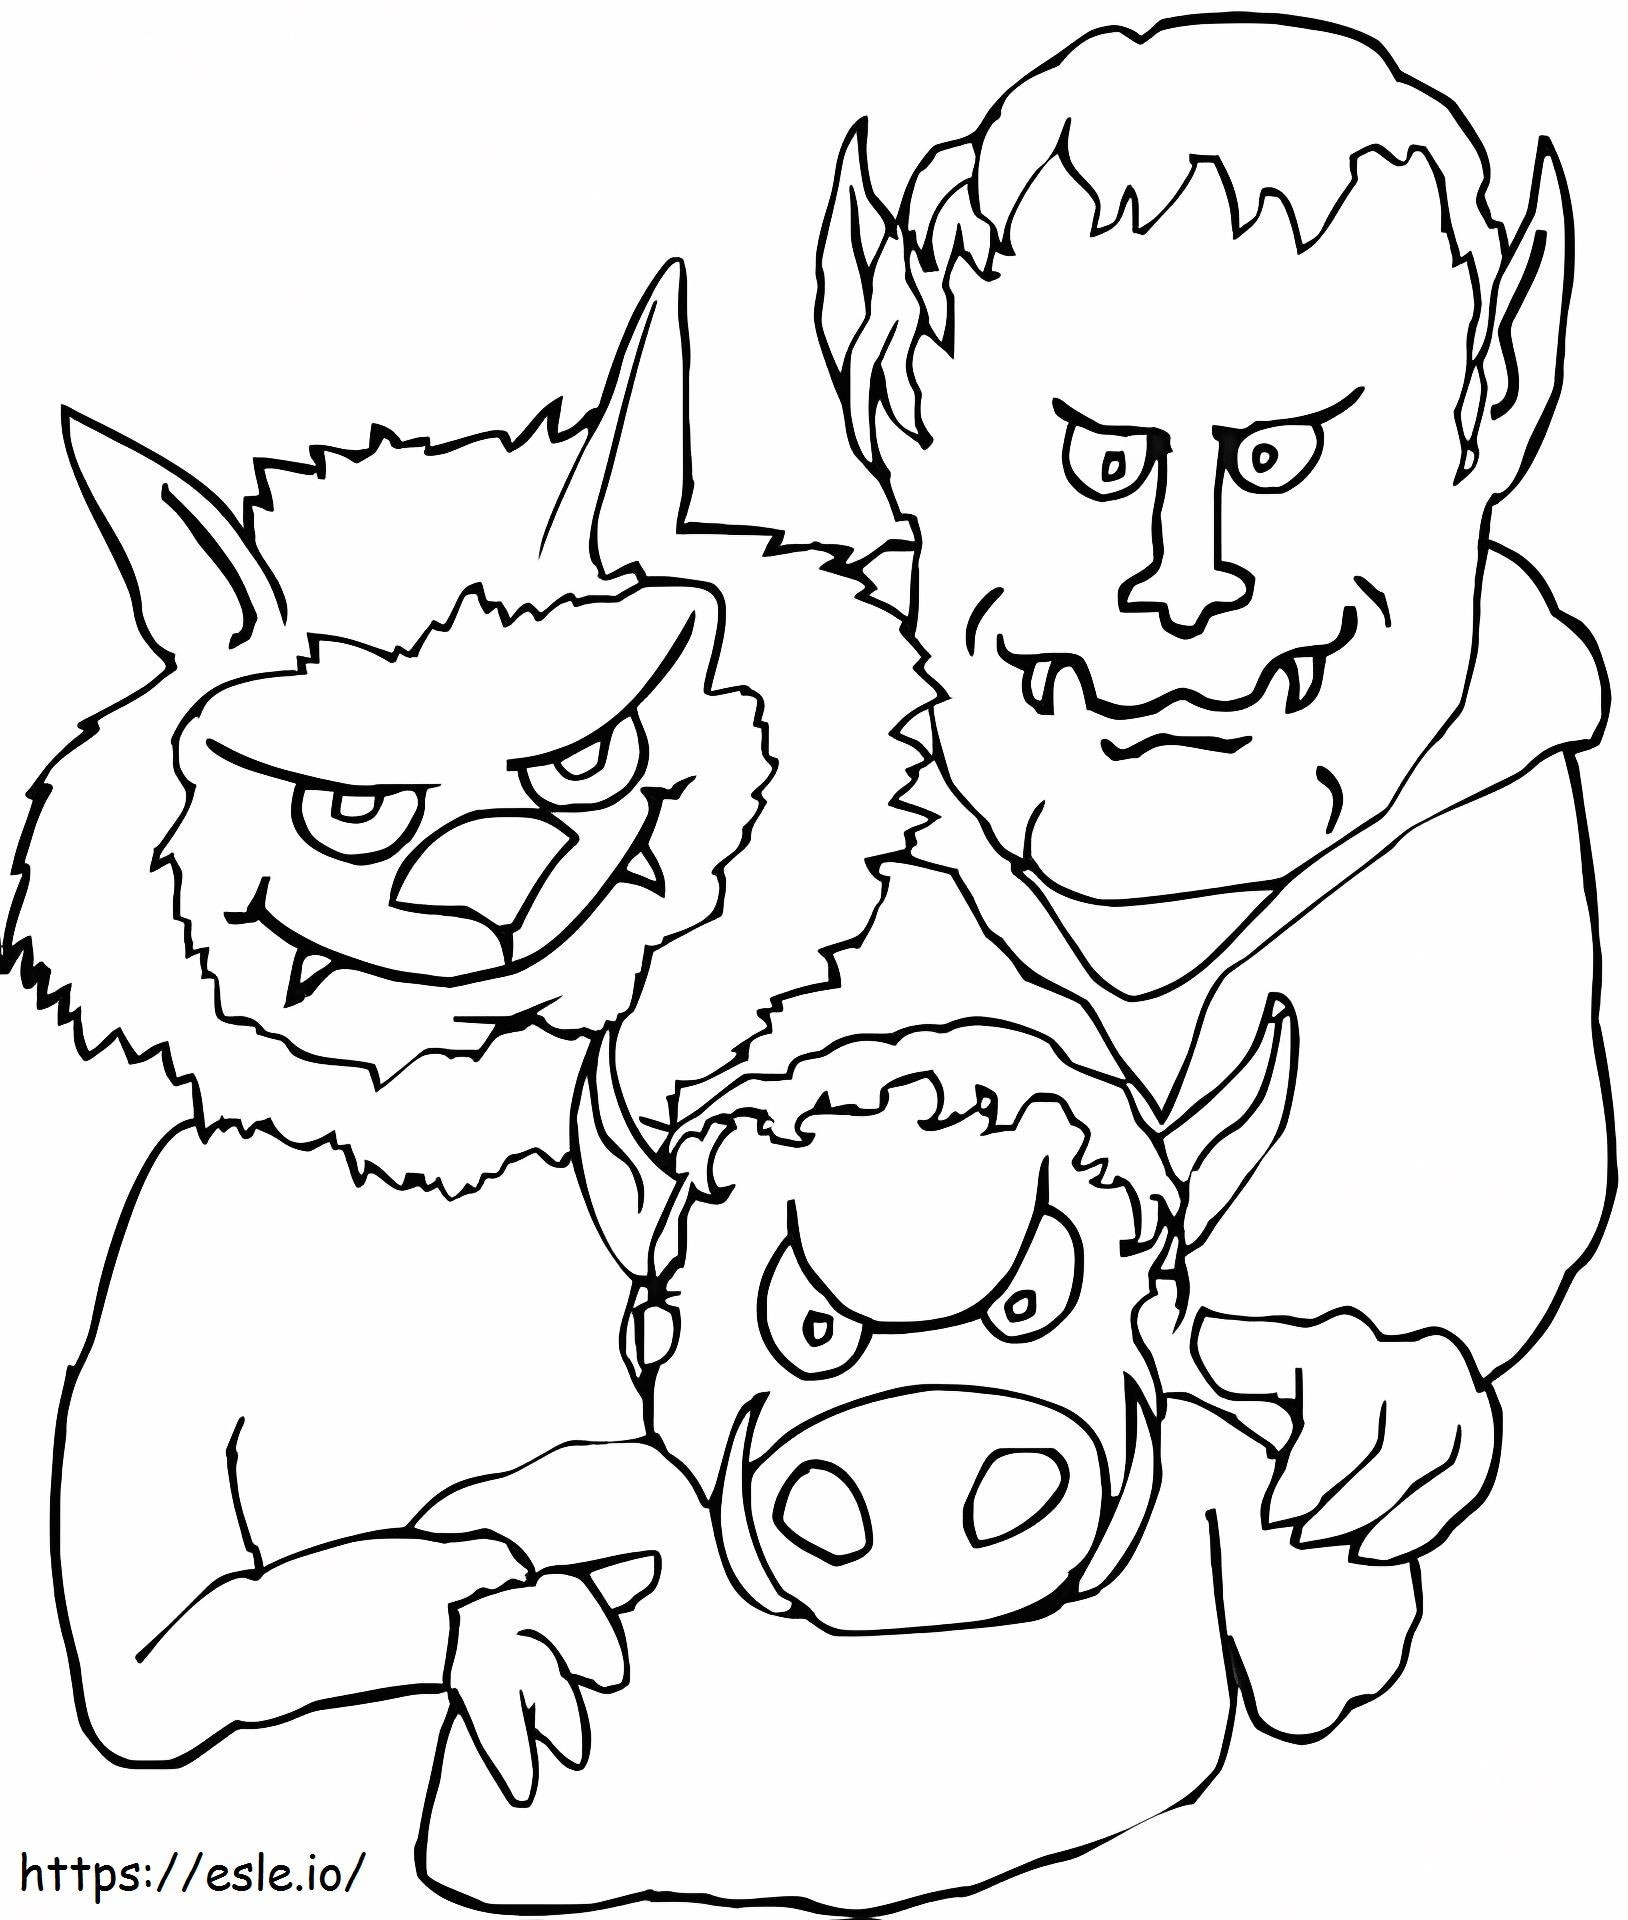 Vampire Family coloring page